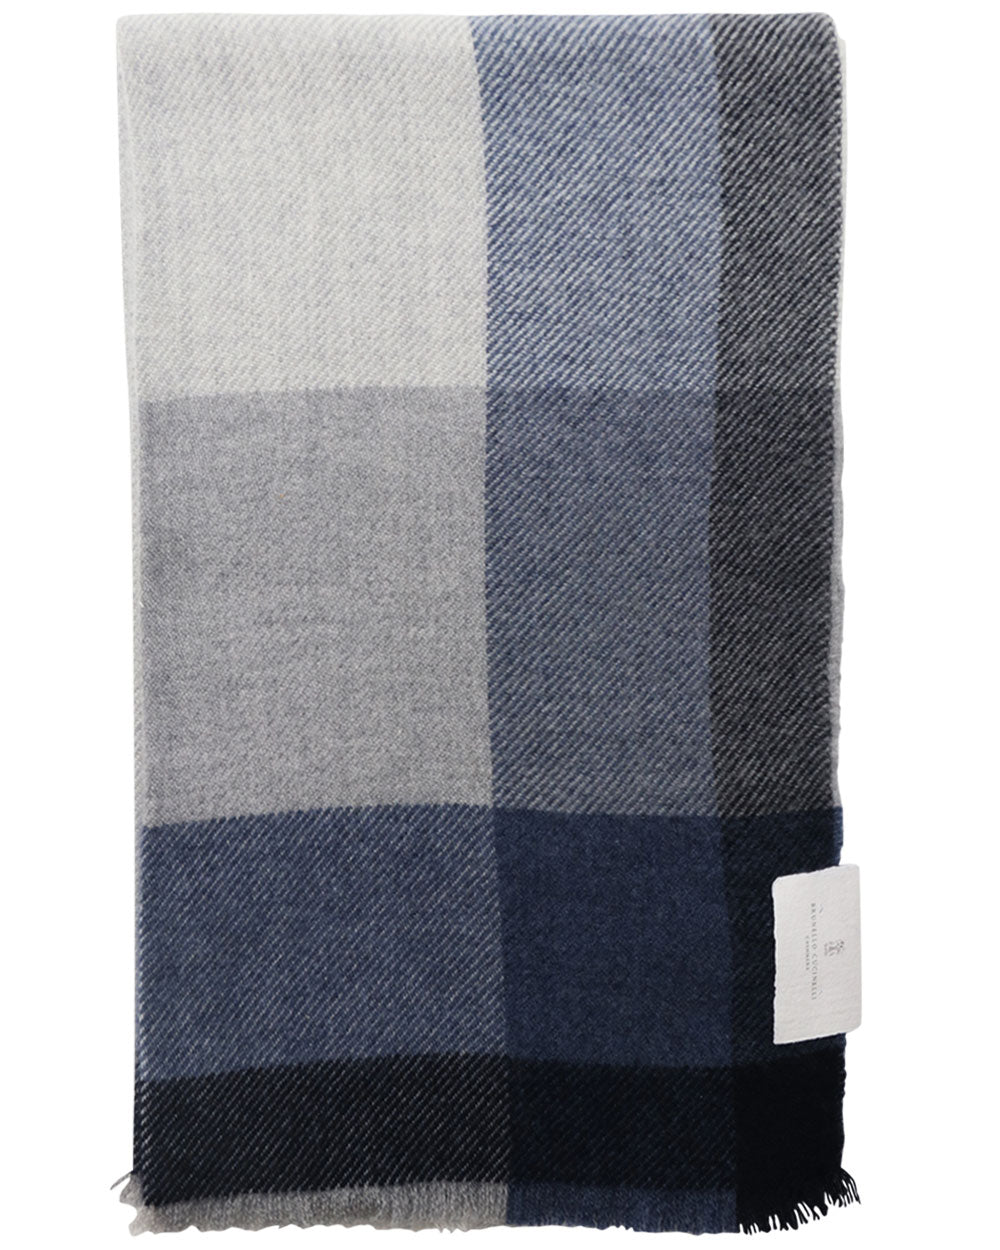 Navy and Grey Plaid Wool Blend Scarf